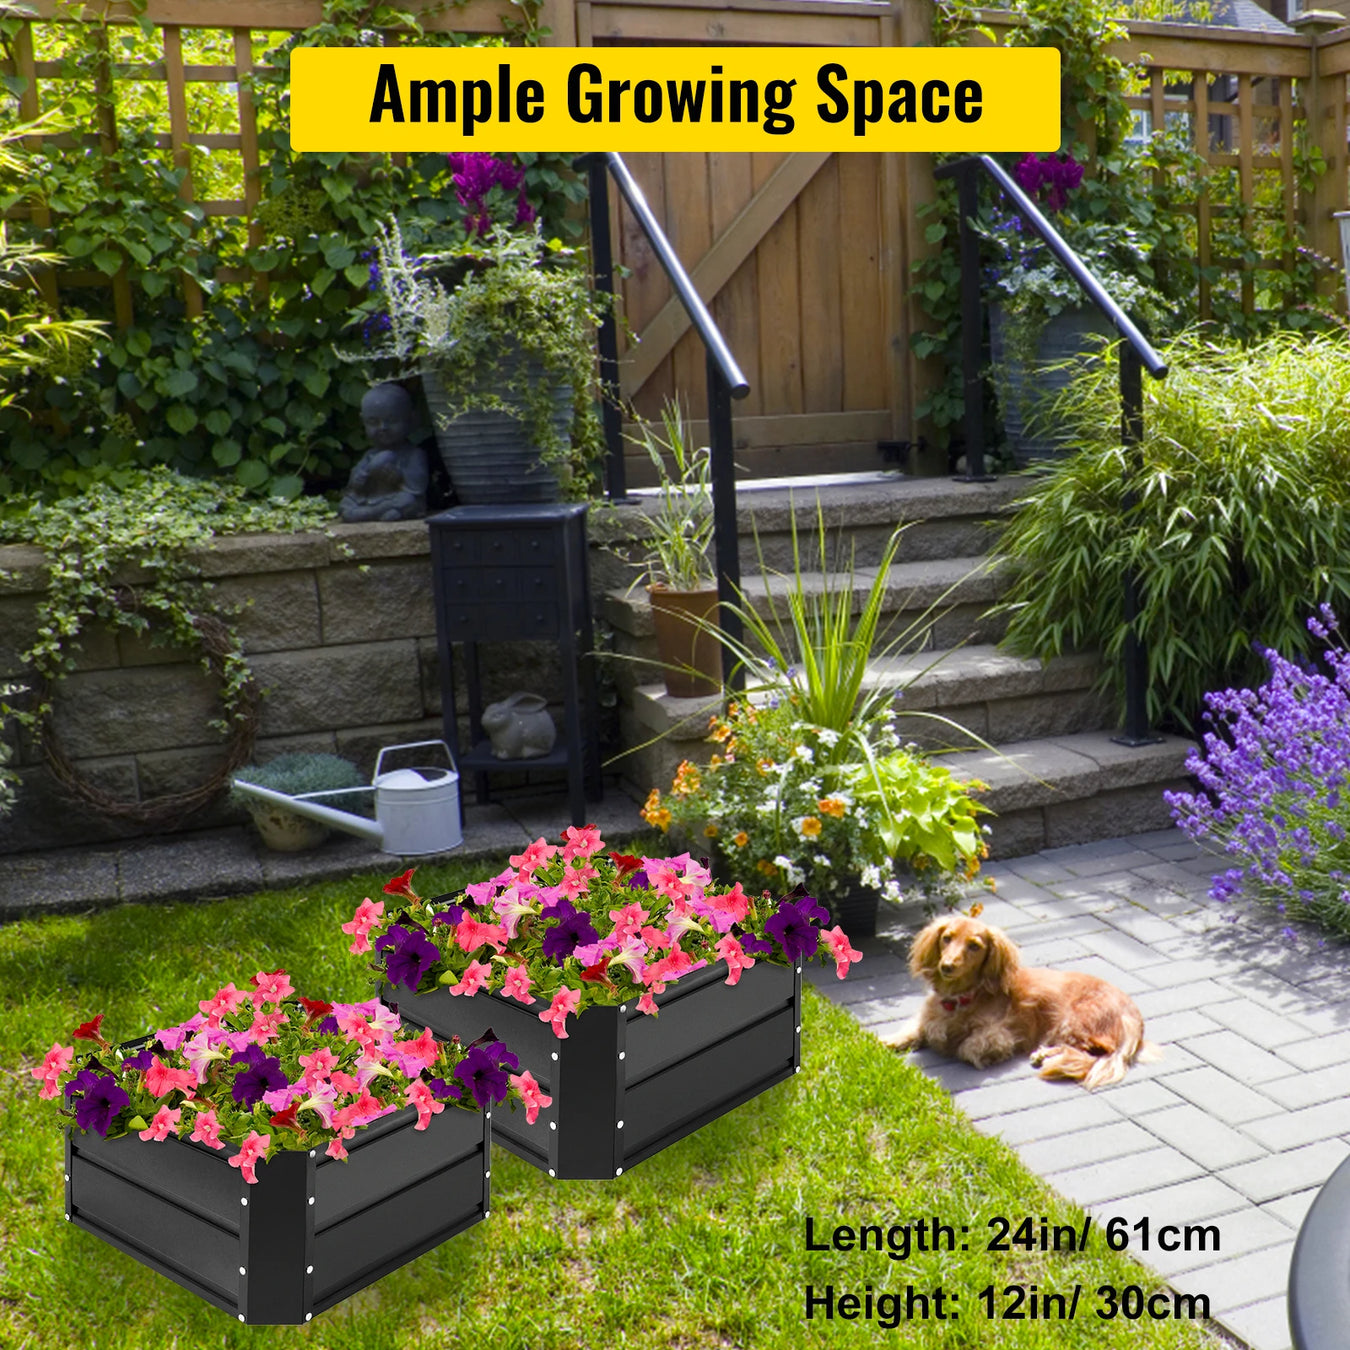 Elevate Your Gardening Experience with the Durable Steel Planting Box